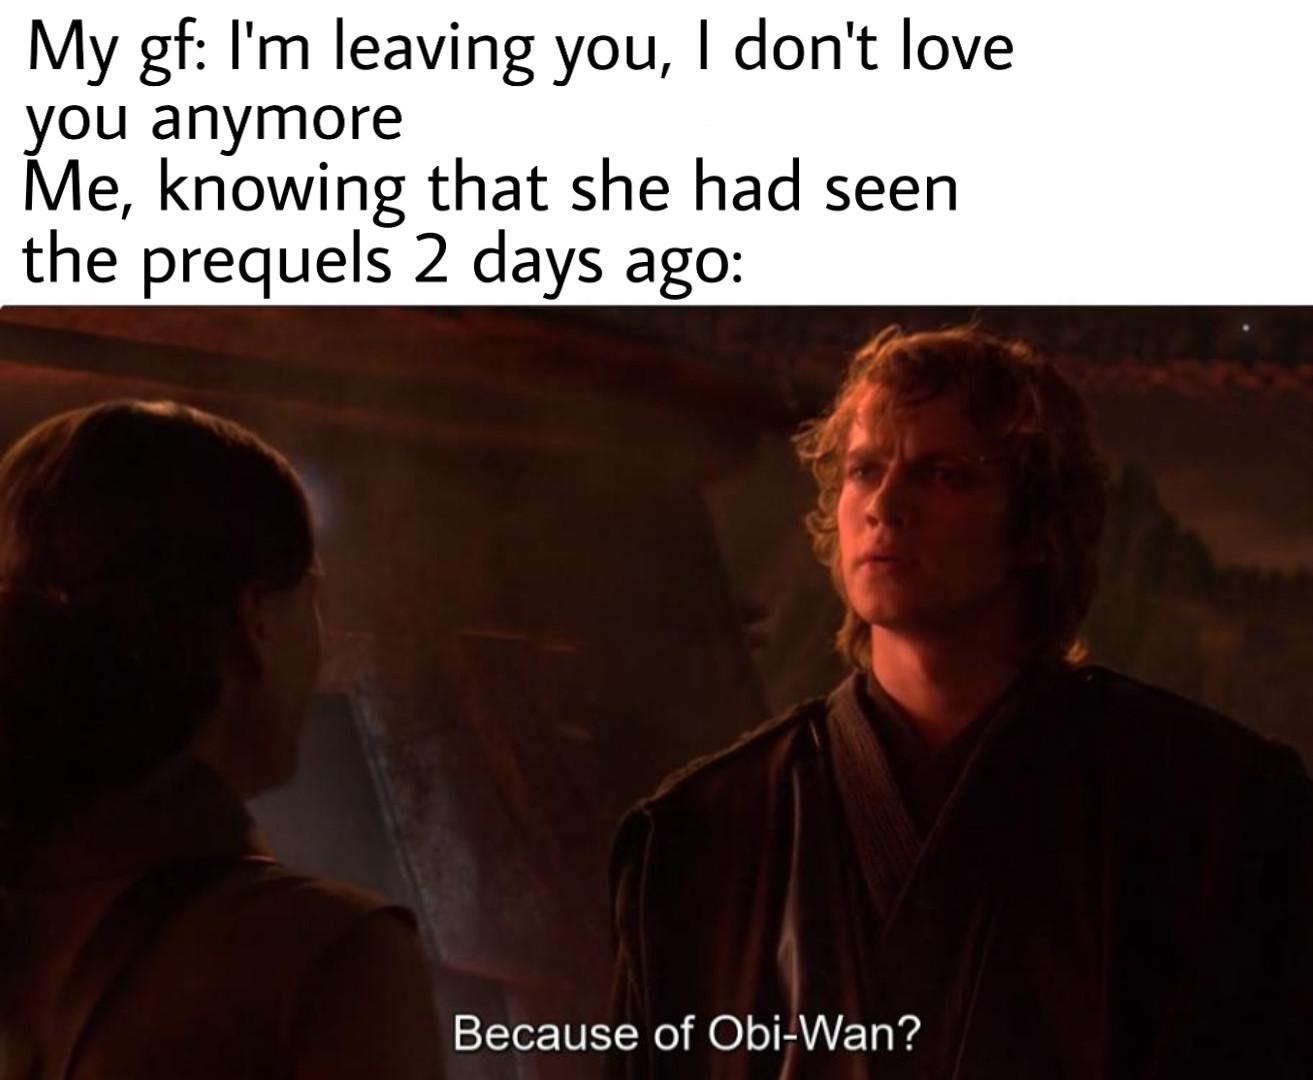 Prequel-memes, Obi-Wan, Satine, Obi, Ewan McGregor, Anakin Star Wars Memes Prequel-memes, Obi-Wan, Satine, Obi, Ewan McGregor, Anakin text: My gf: I'm leaving you, I don't love you anymore Me, knowing that she had seen the prequels 2 days ago: Because of Obi-Wan? 